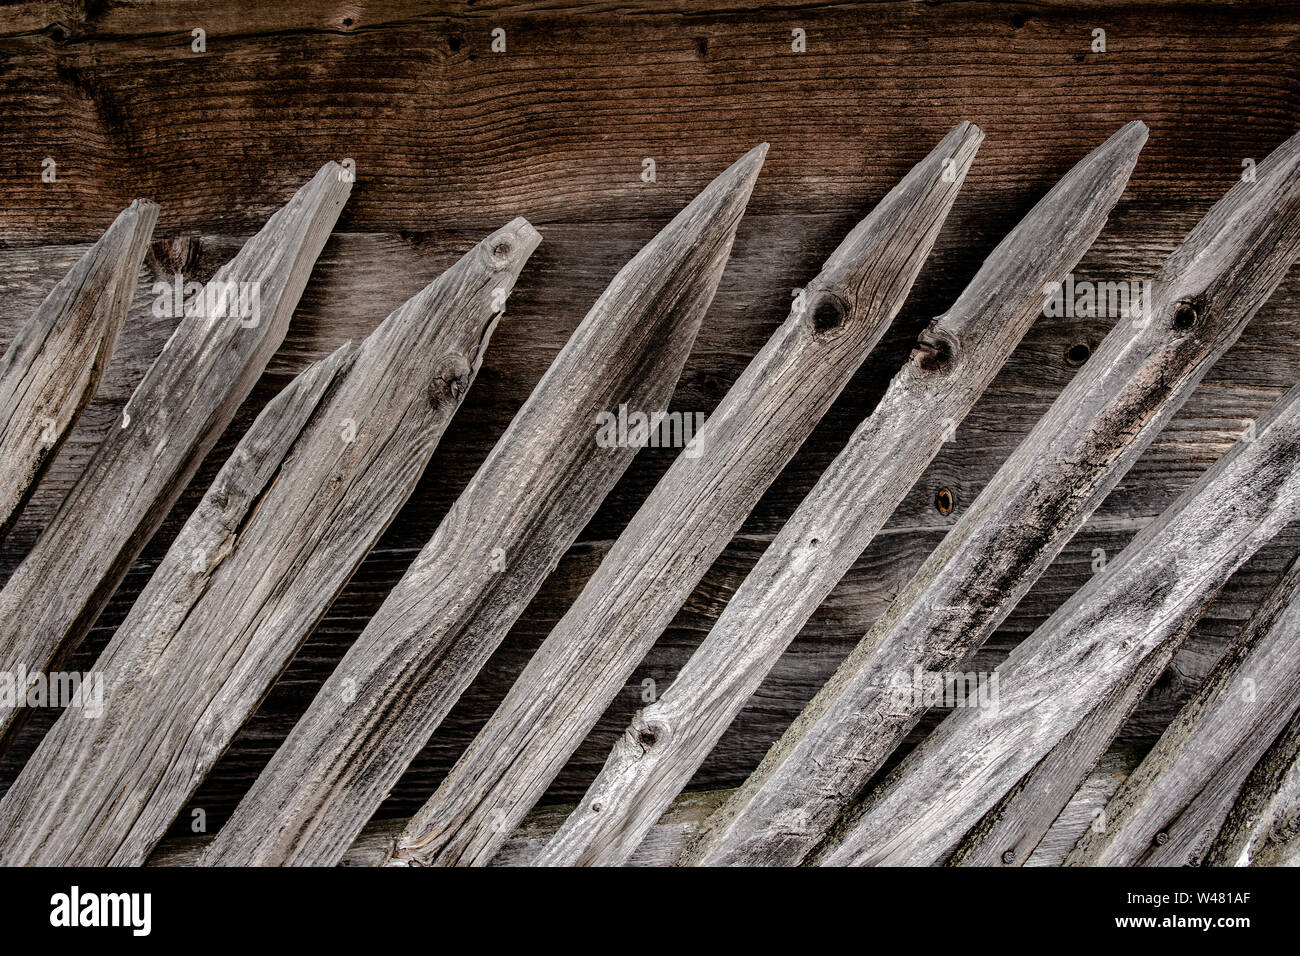 Vintage Old Wooden Fence Texture and Grunge Background Surface Stock Photo